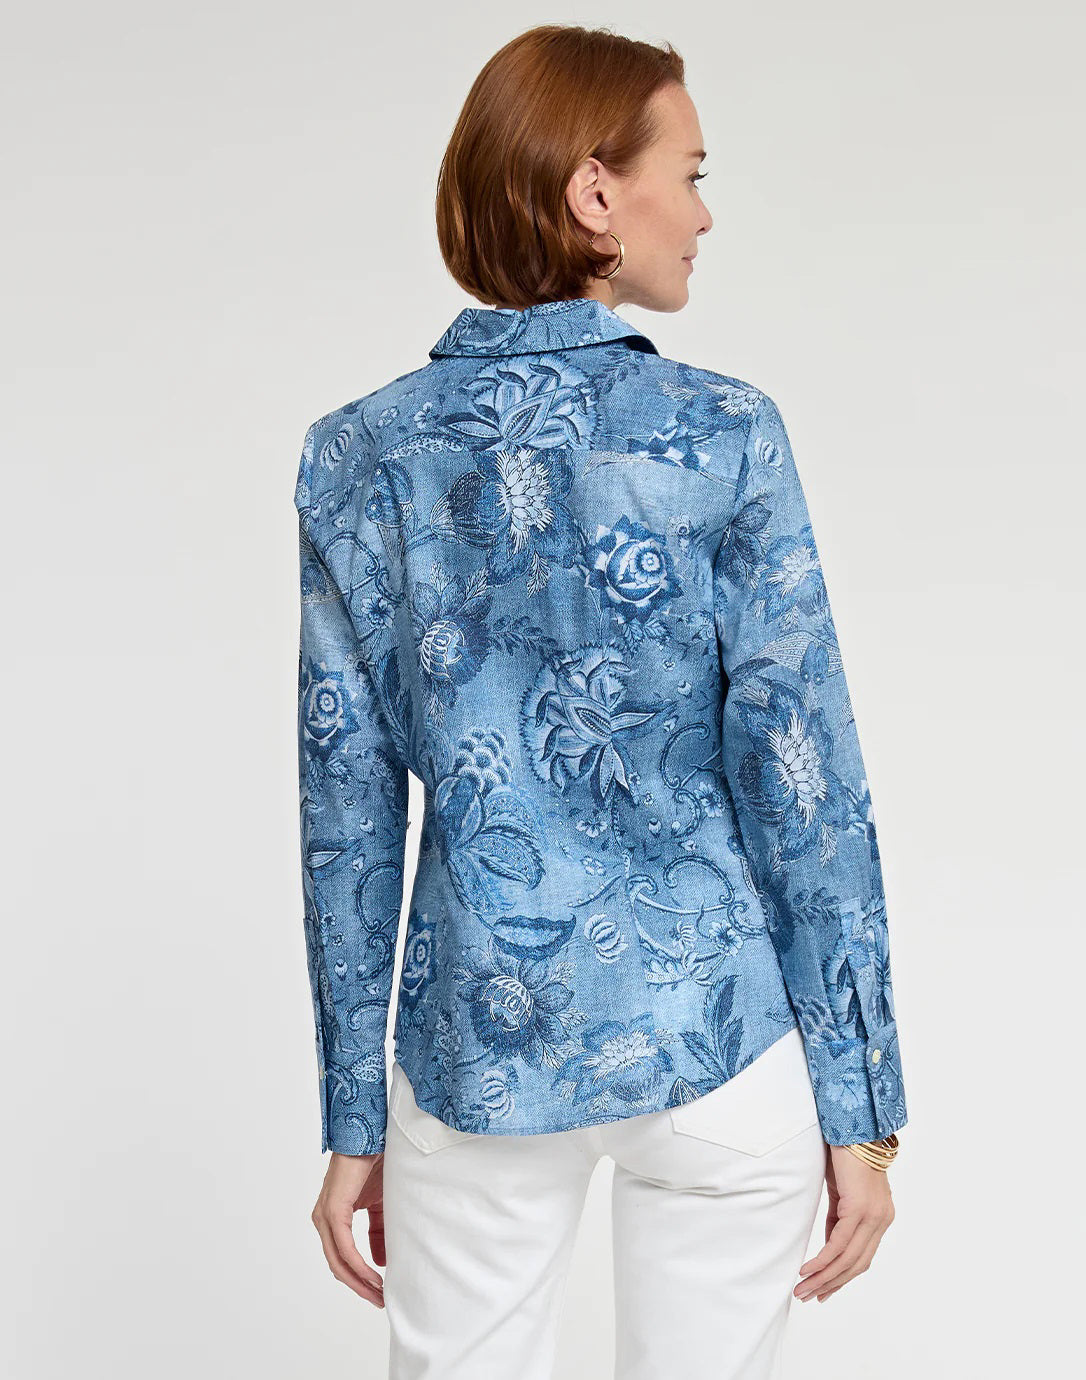 HINSON WU - DIANE SHIRT IN PASSIONFLOWER PRINT